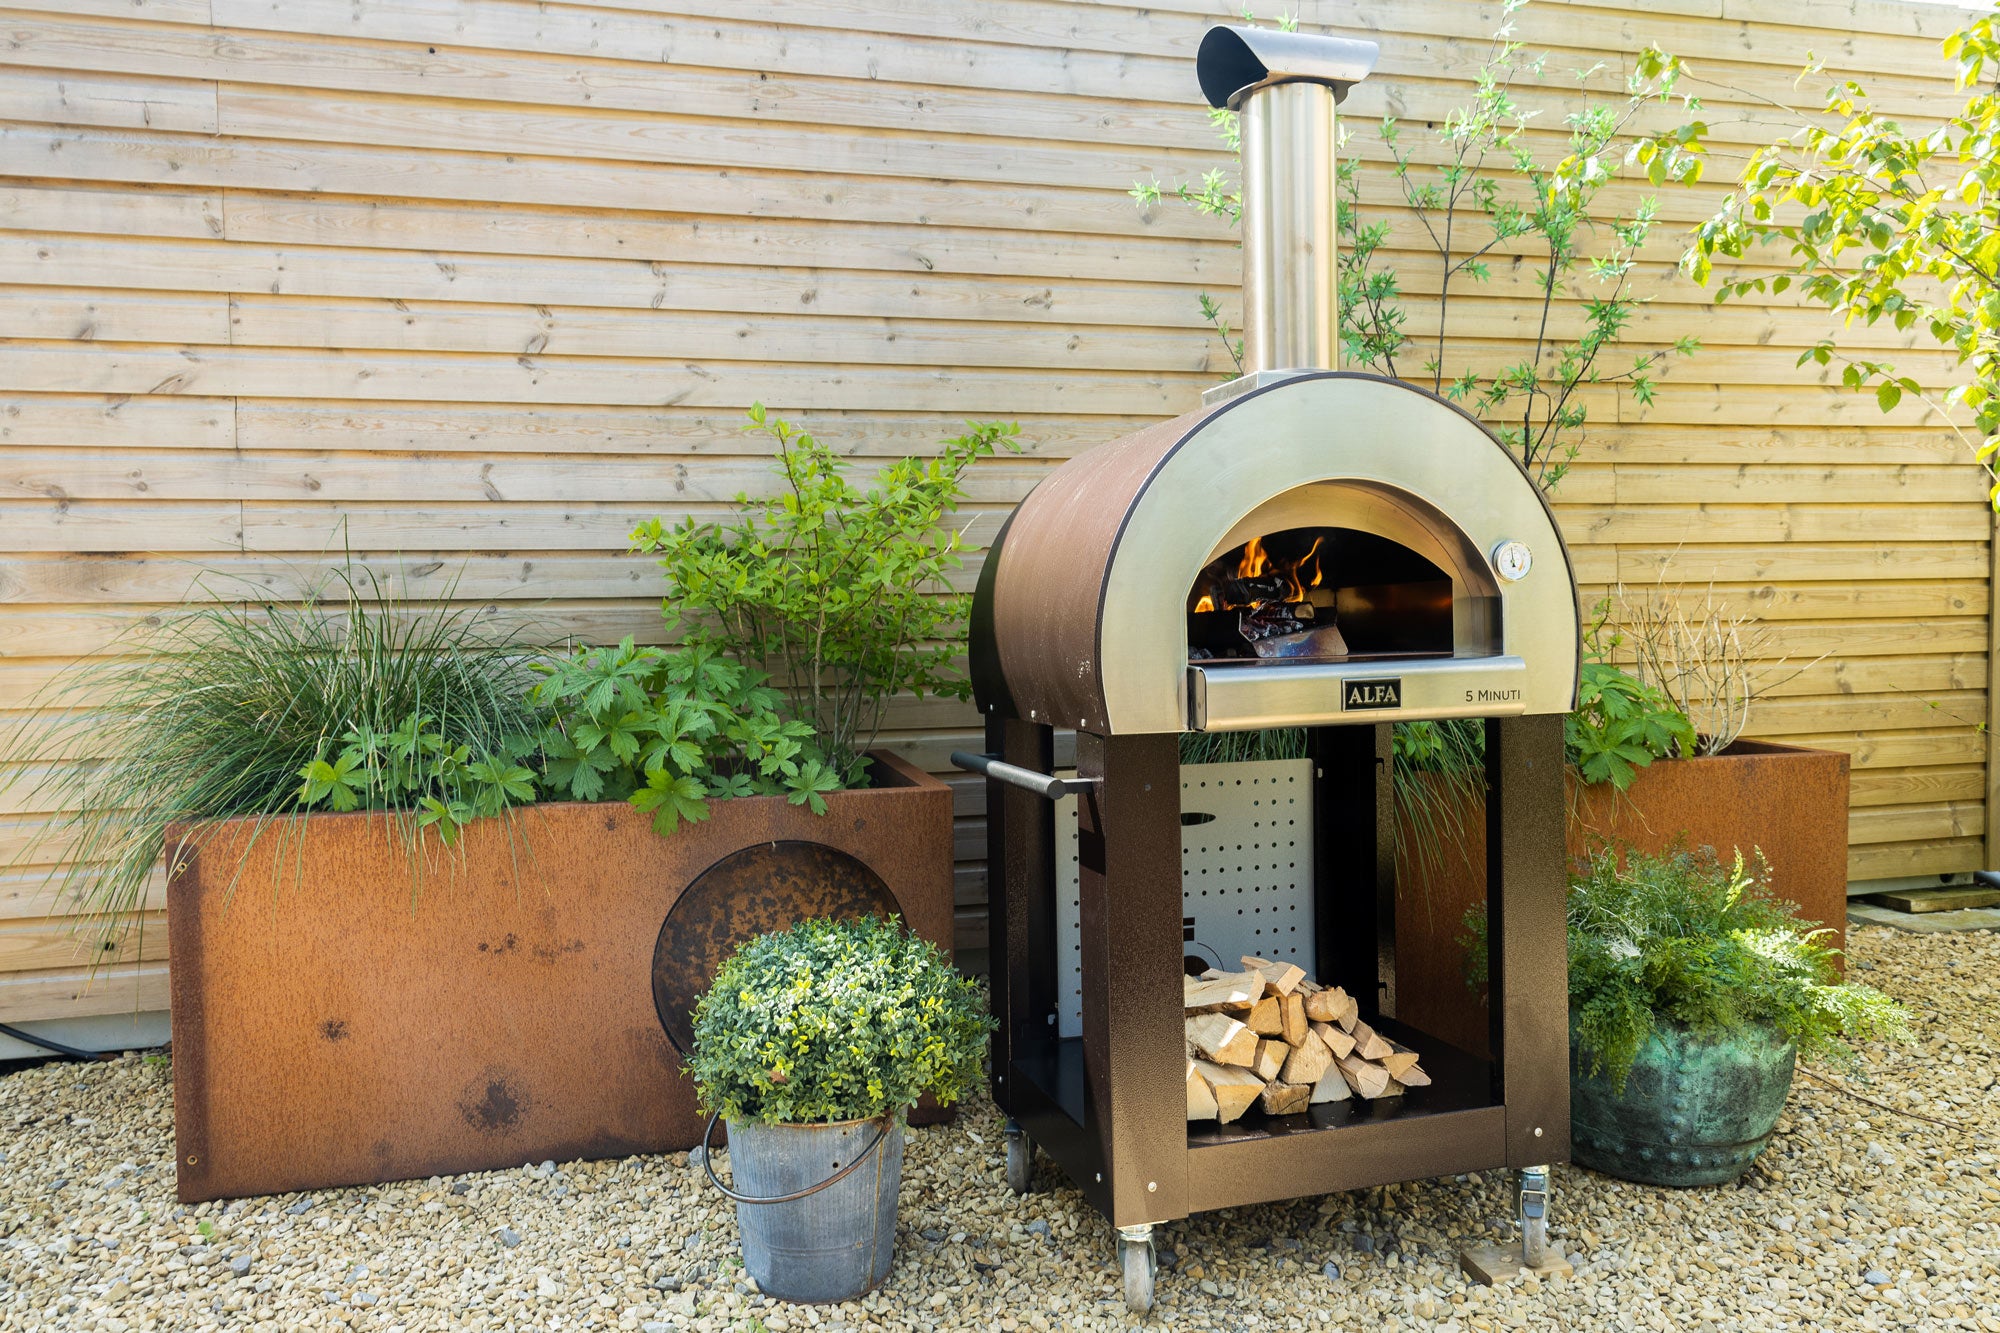 Pizza Oven Stand for 5 Minuti